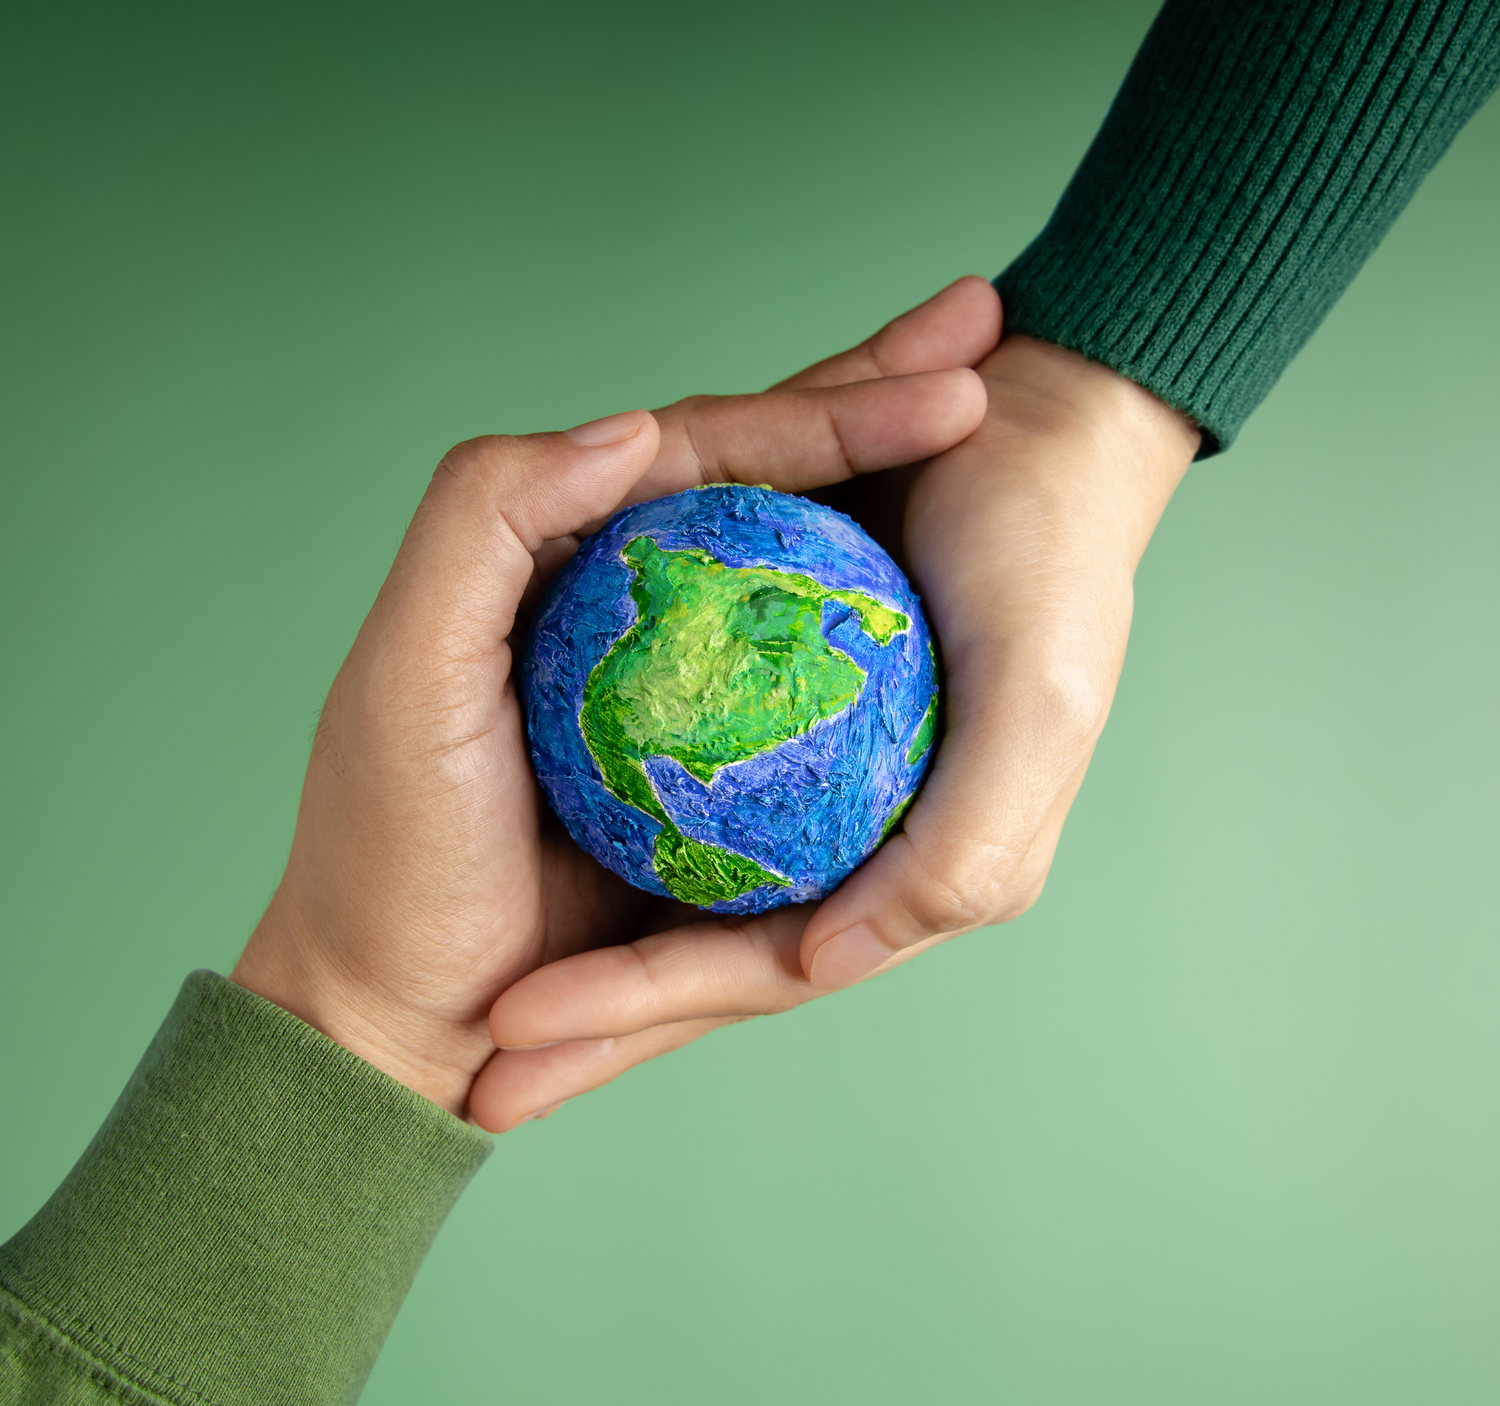 Image showing two different hands cupping a single globe together, symbolizing a collaborative effort in environmental sustainability and planet care.